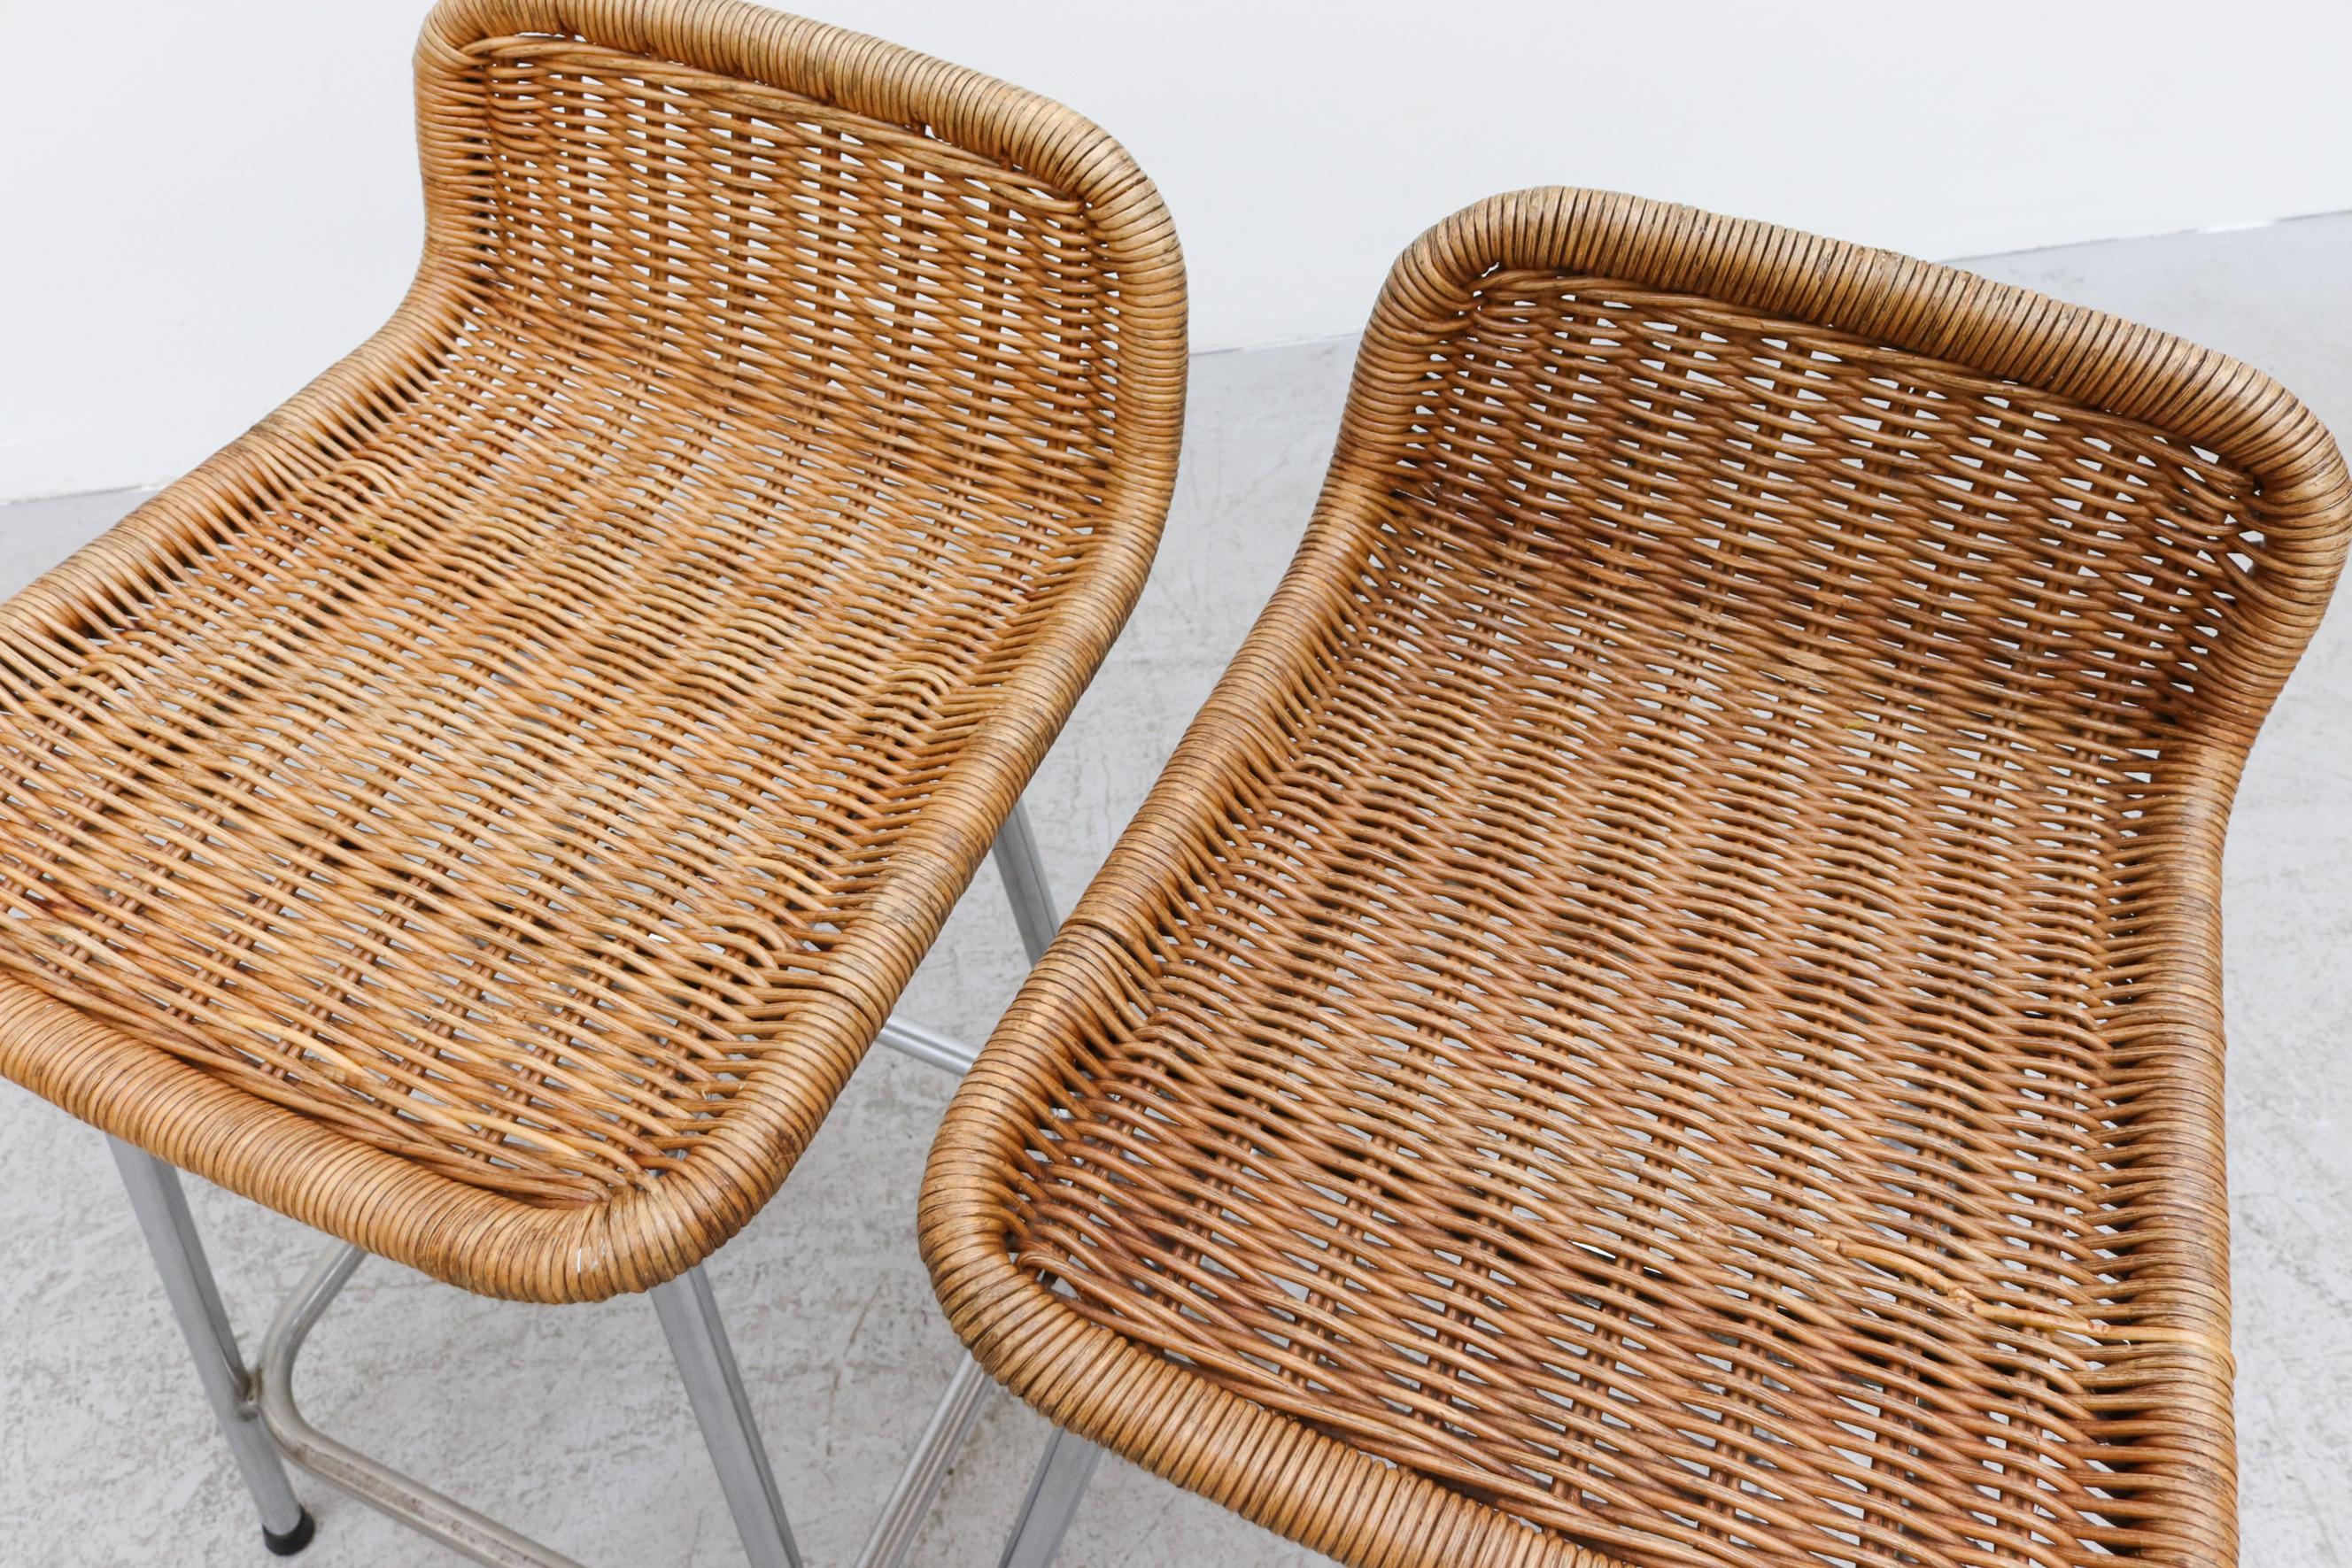 Woven Pair of Charlotte Perriand Style Wicker Bar Stools